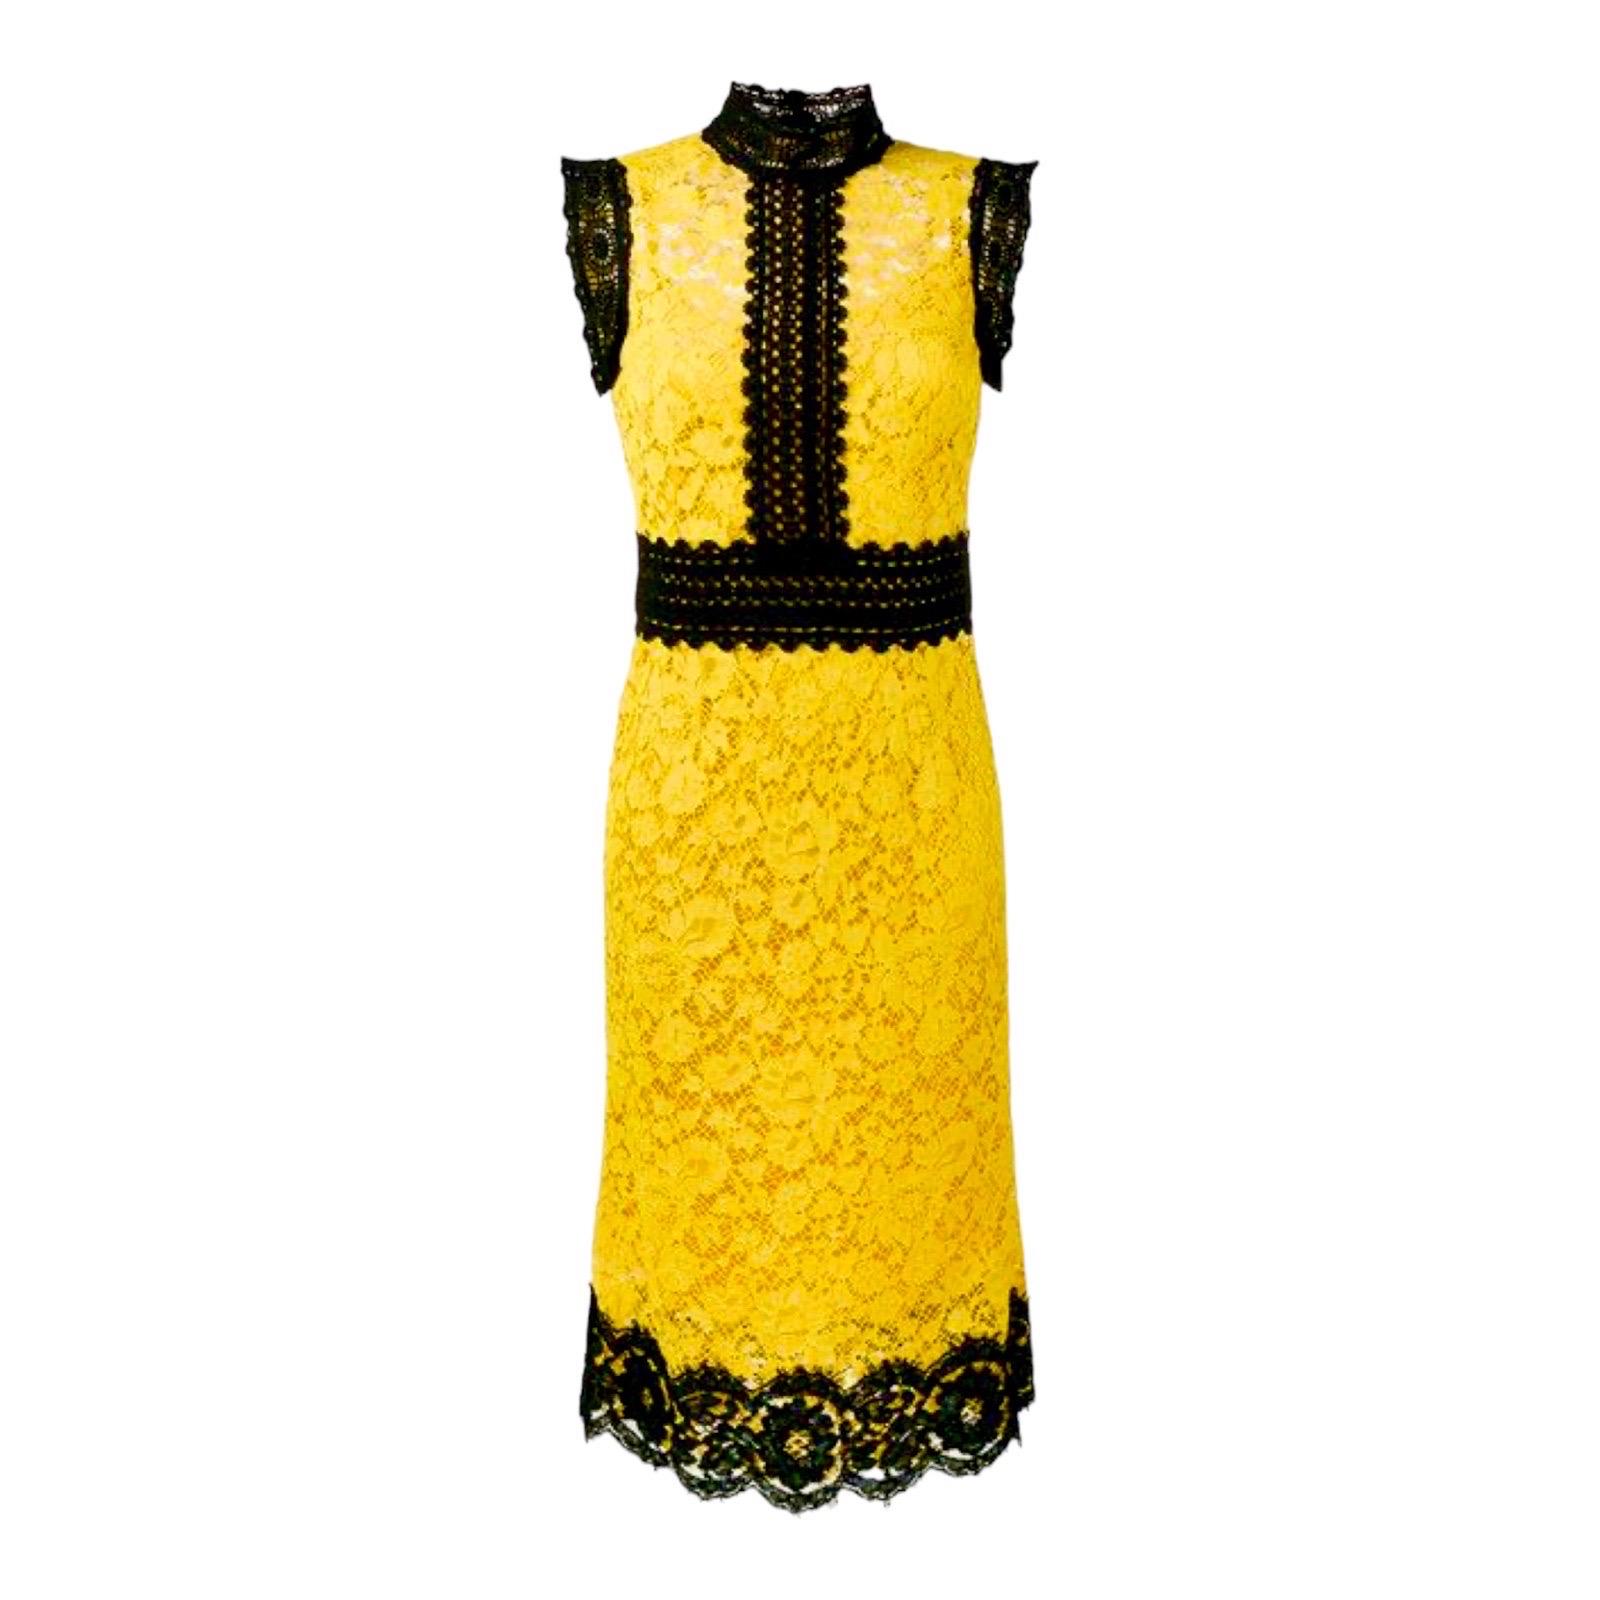 UNWORN Dolce & Gabbana Yellow & Black Guipure Lace Evening Cocktail Dress 40 For Sale